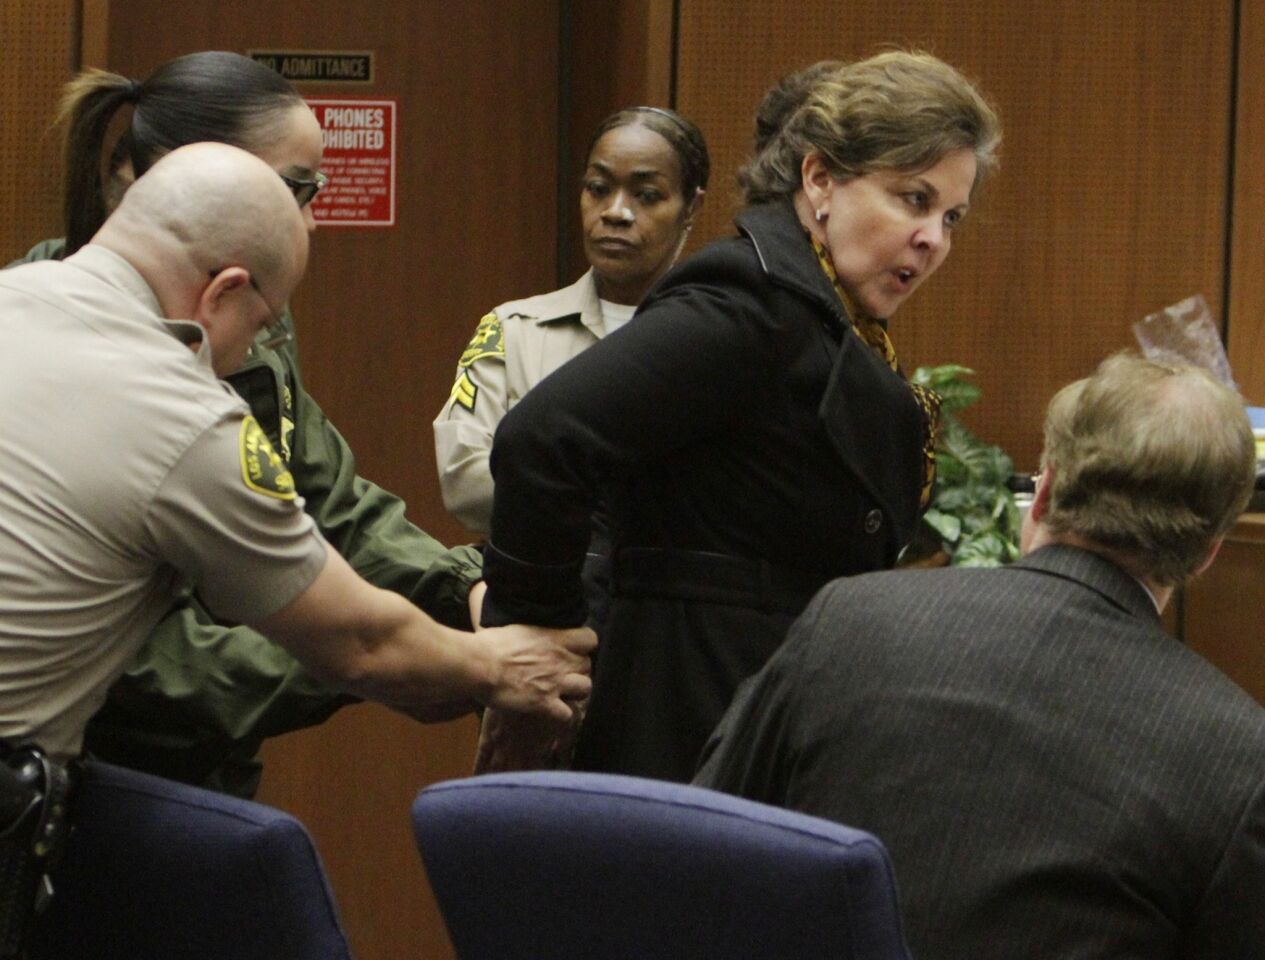 Angela Spaccia was remanded to custody after the verdicts were read, with the judge saying her crimes carried a mandatory state prison sentence.